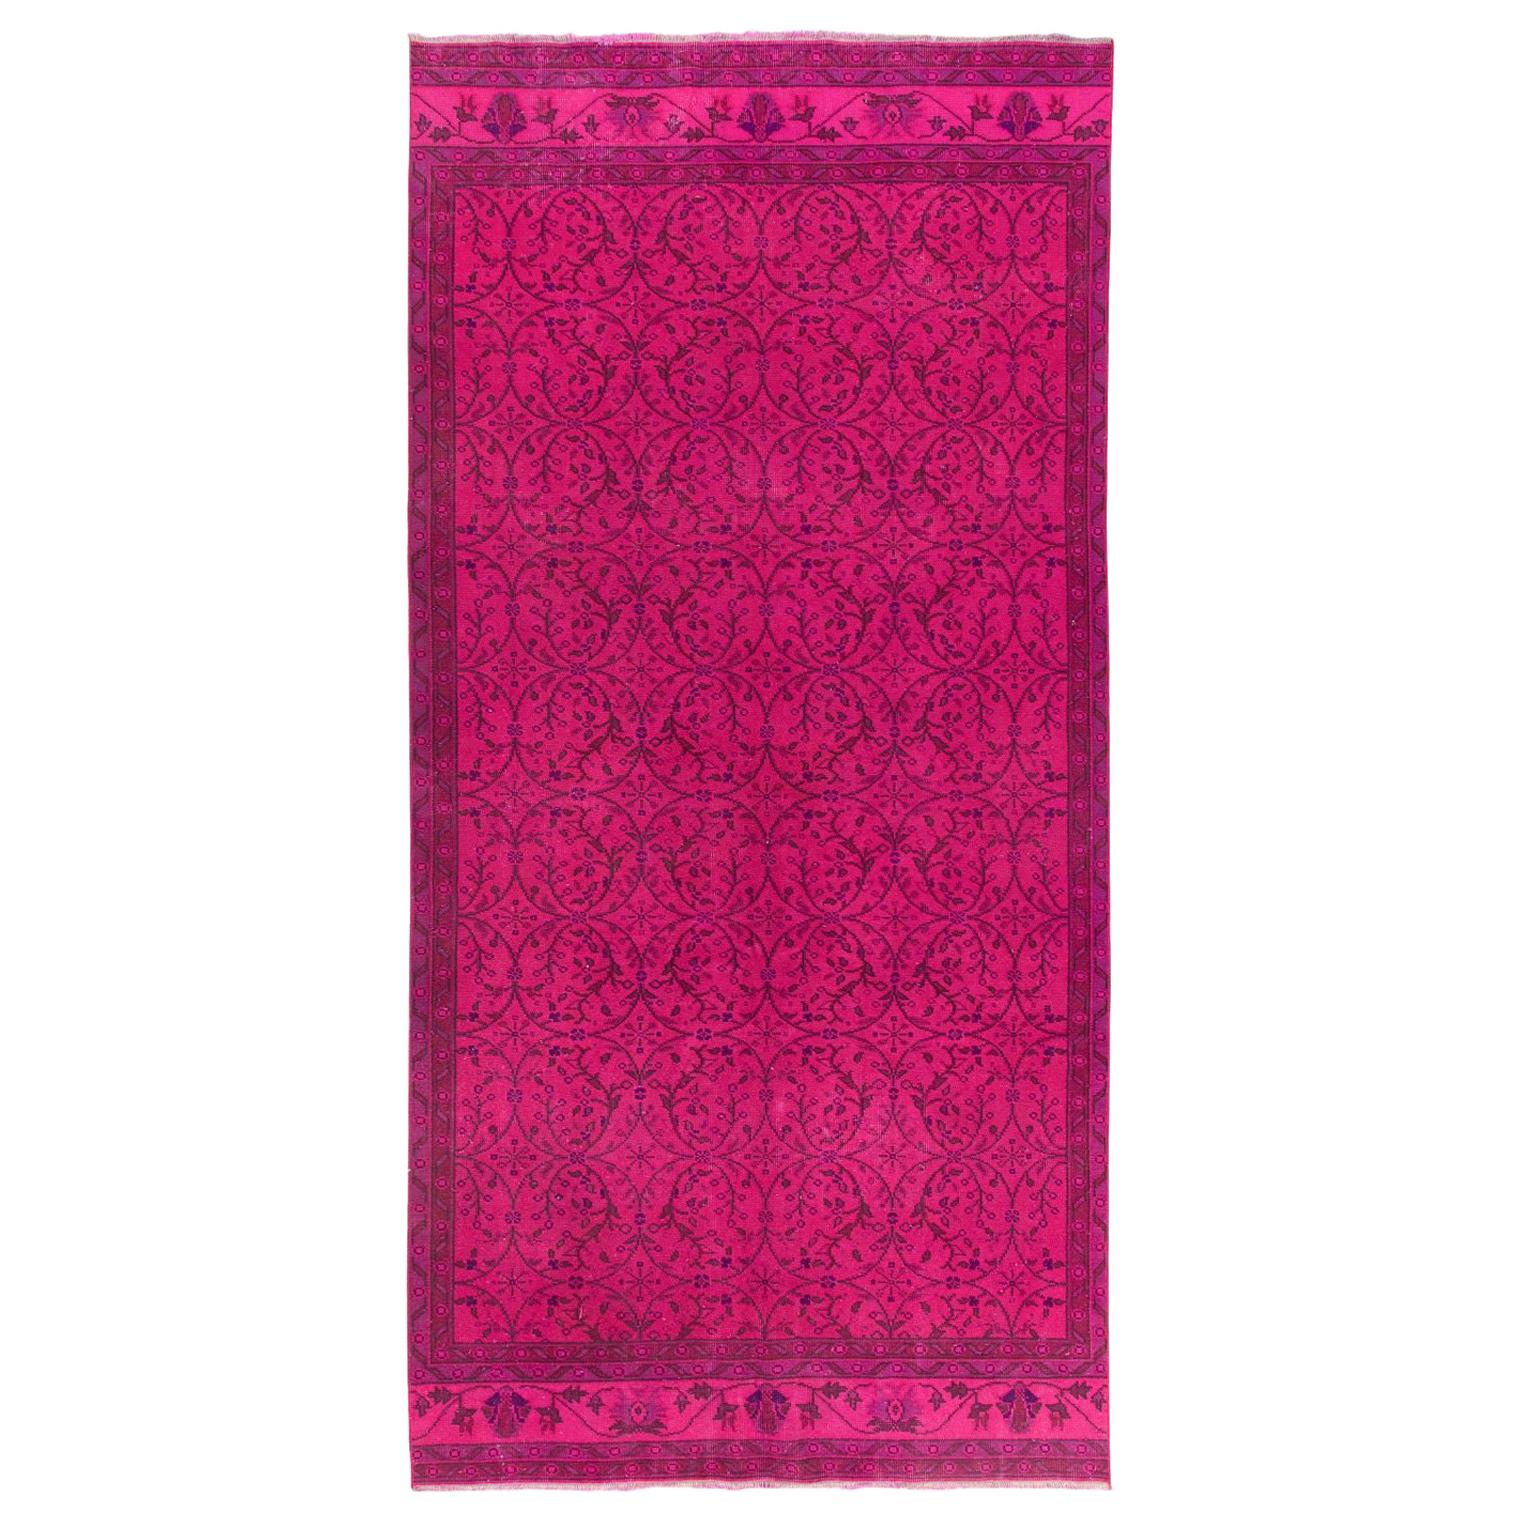 5.3x10.8 Ft Vintage Handmade Rug Re-Dyed in Fuchsia pink, Woolen Turkish Carpet For Sale